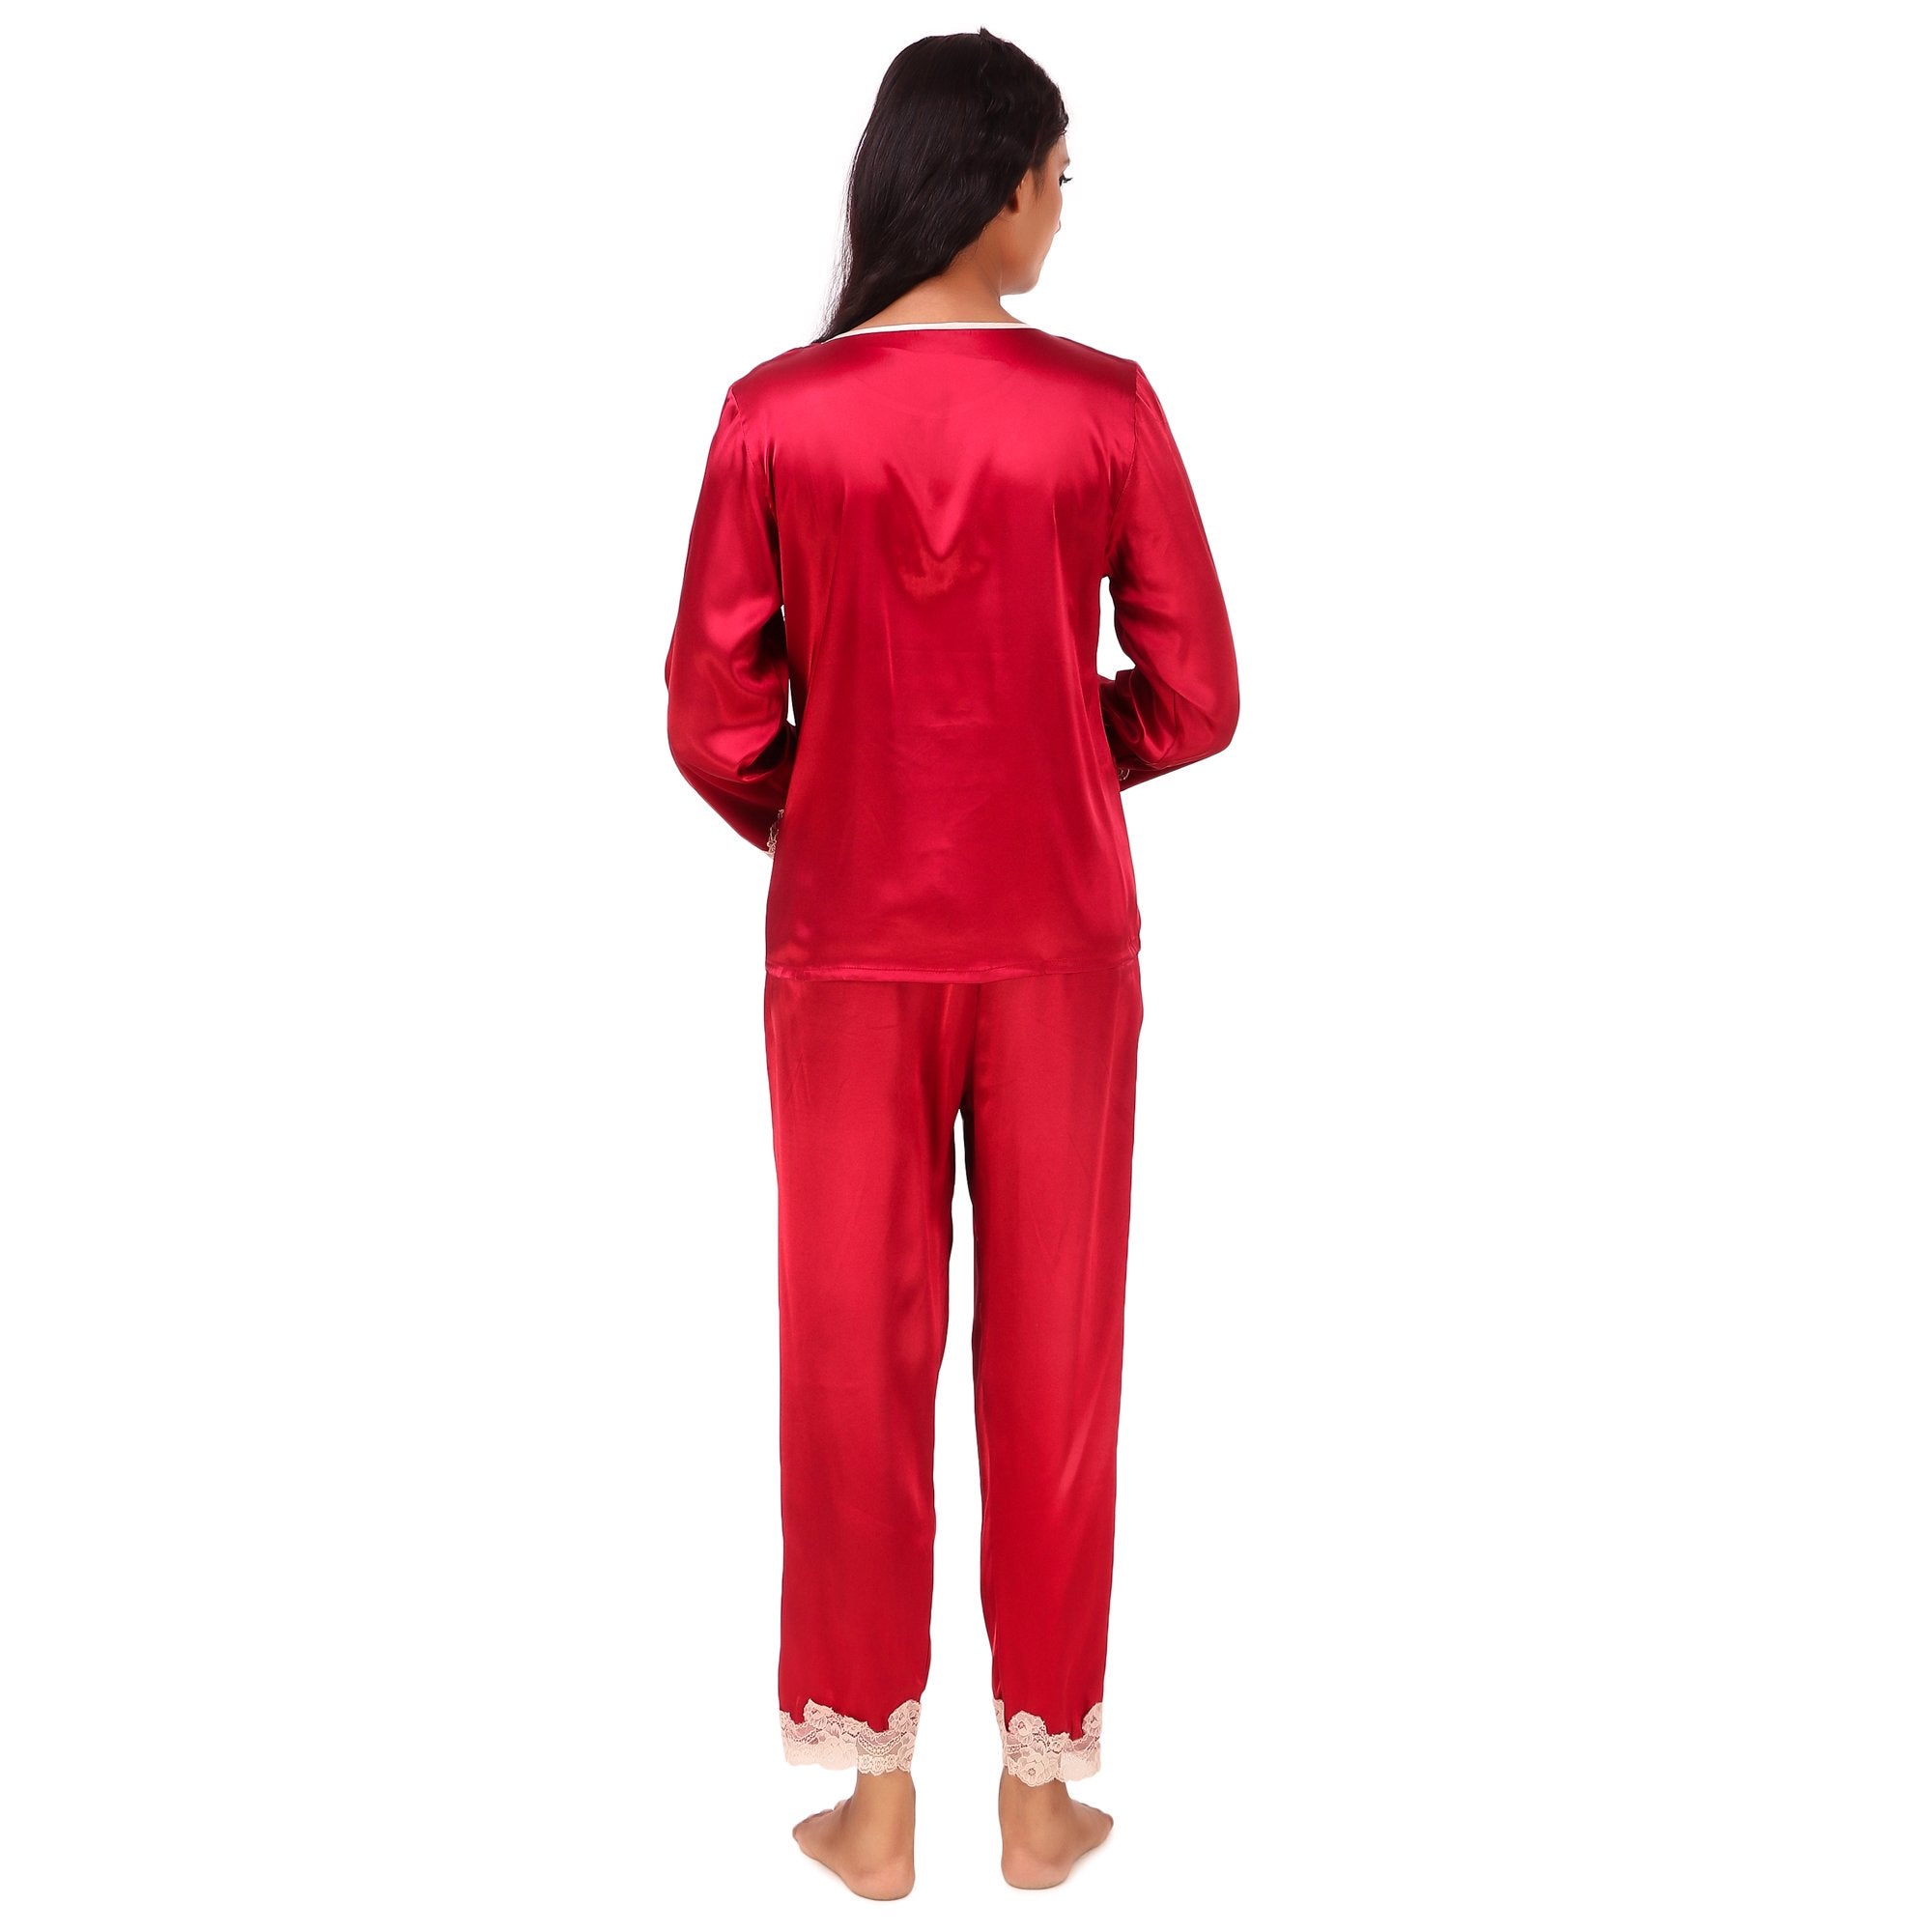 AXTZH-XNSL037 Smooth satin Pyjamas with soft lace Set for Women